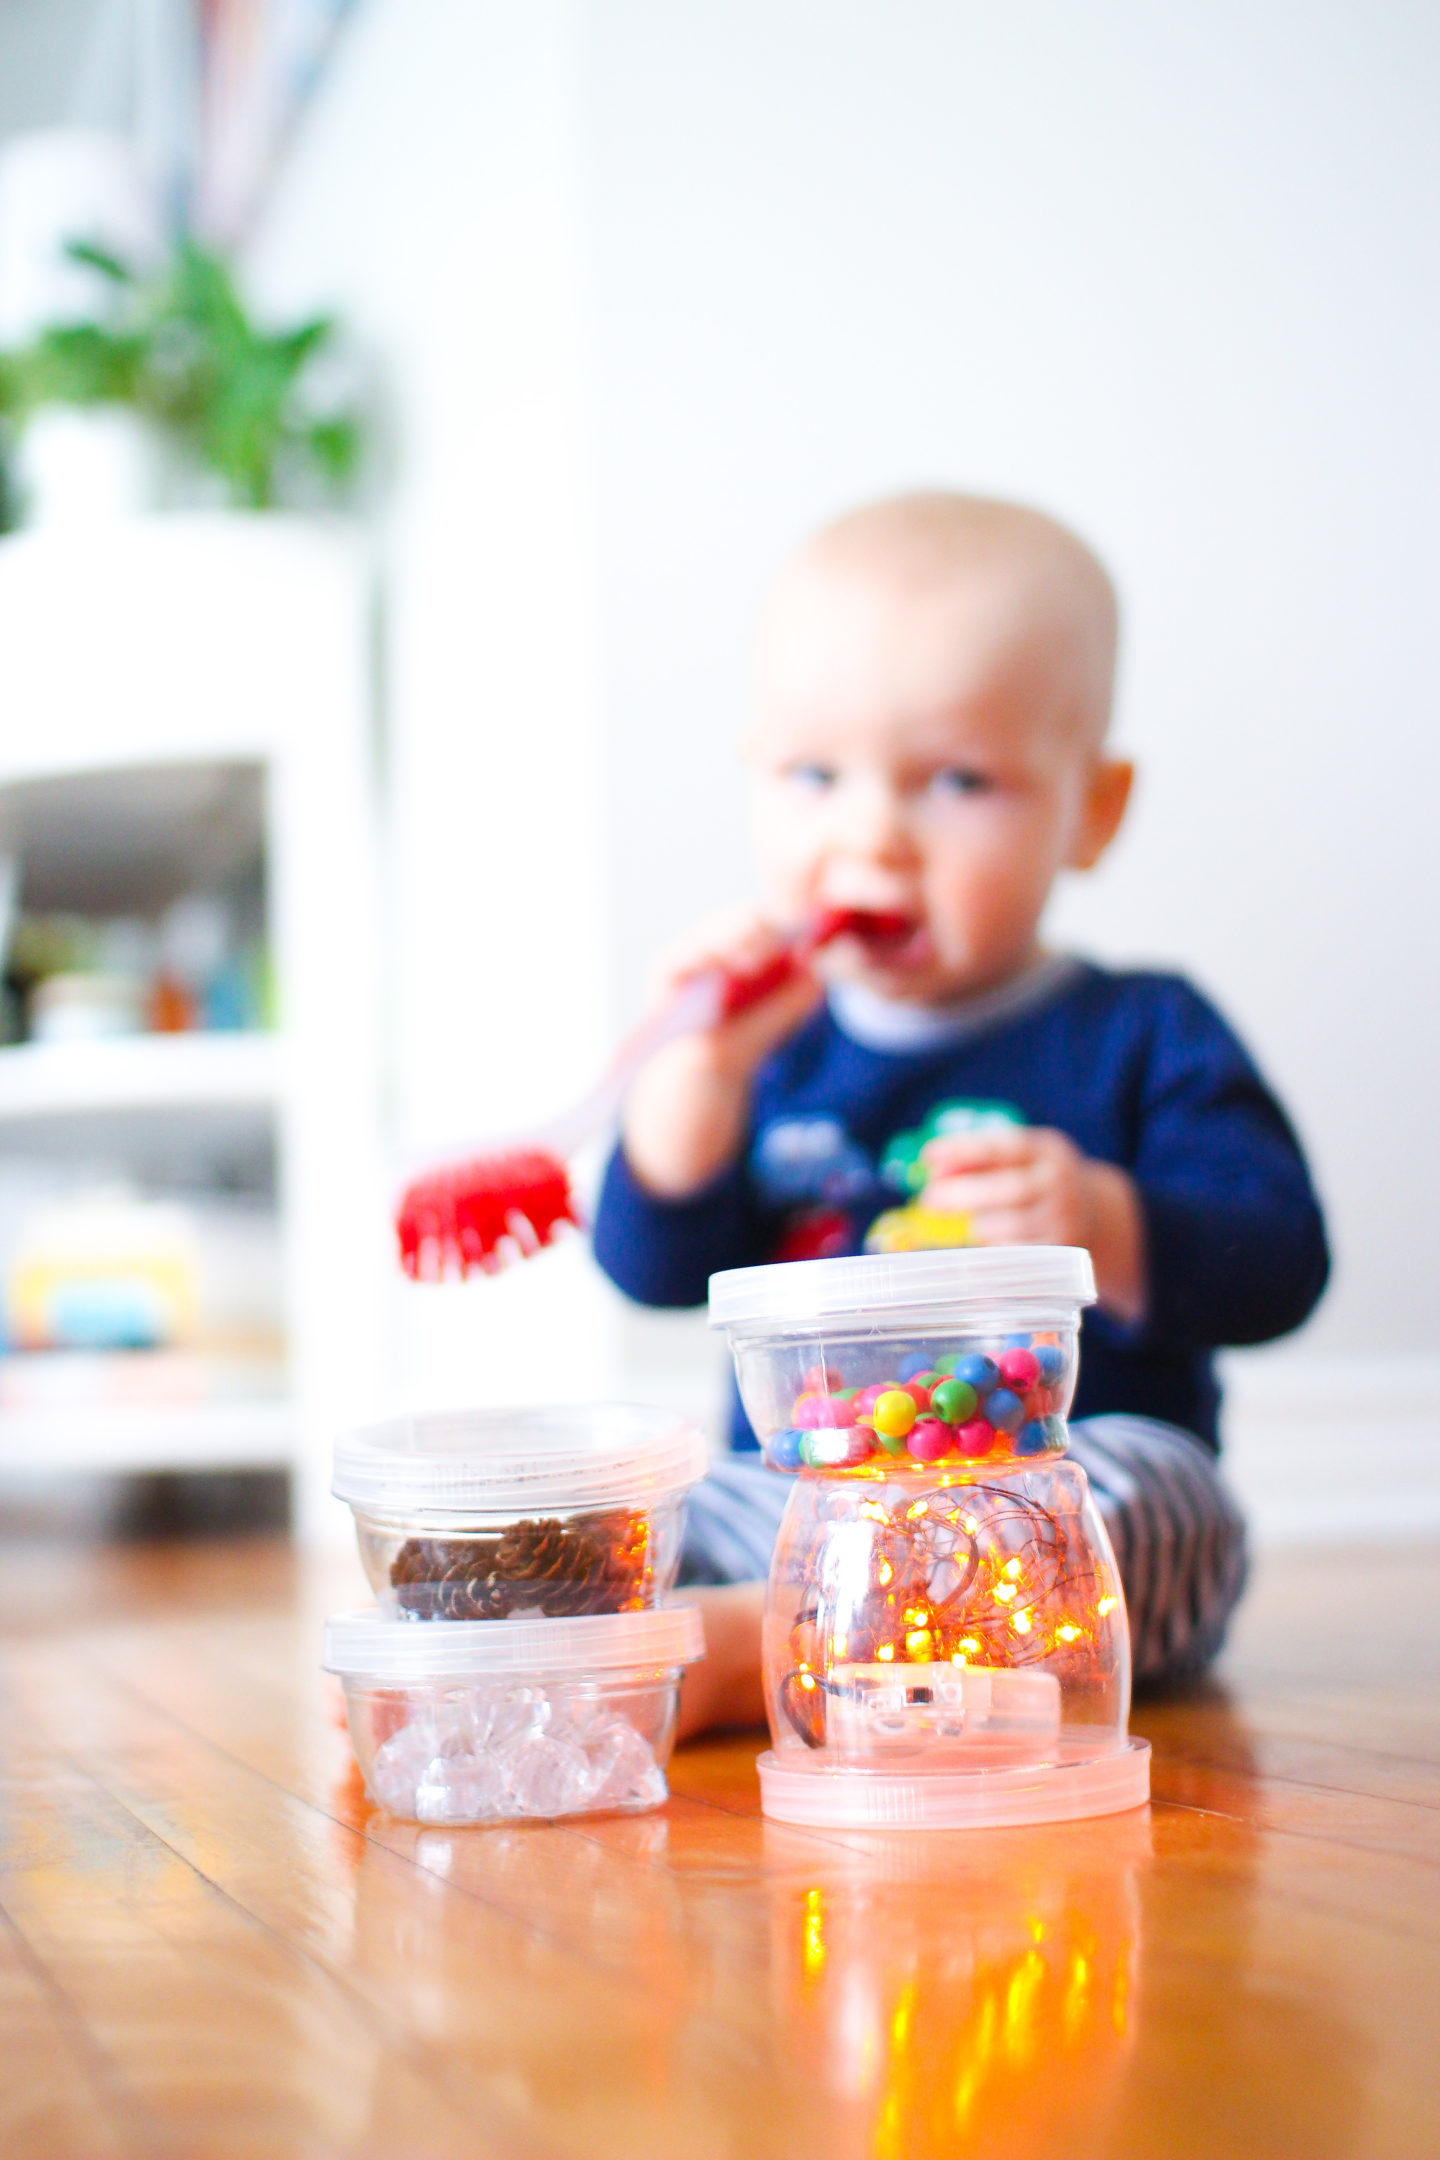 loose parts play for infants and toddlers